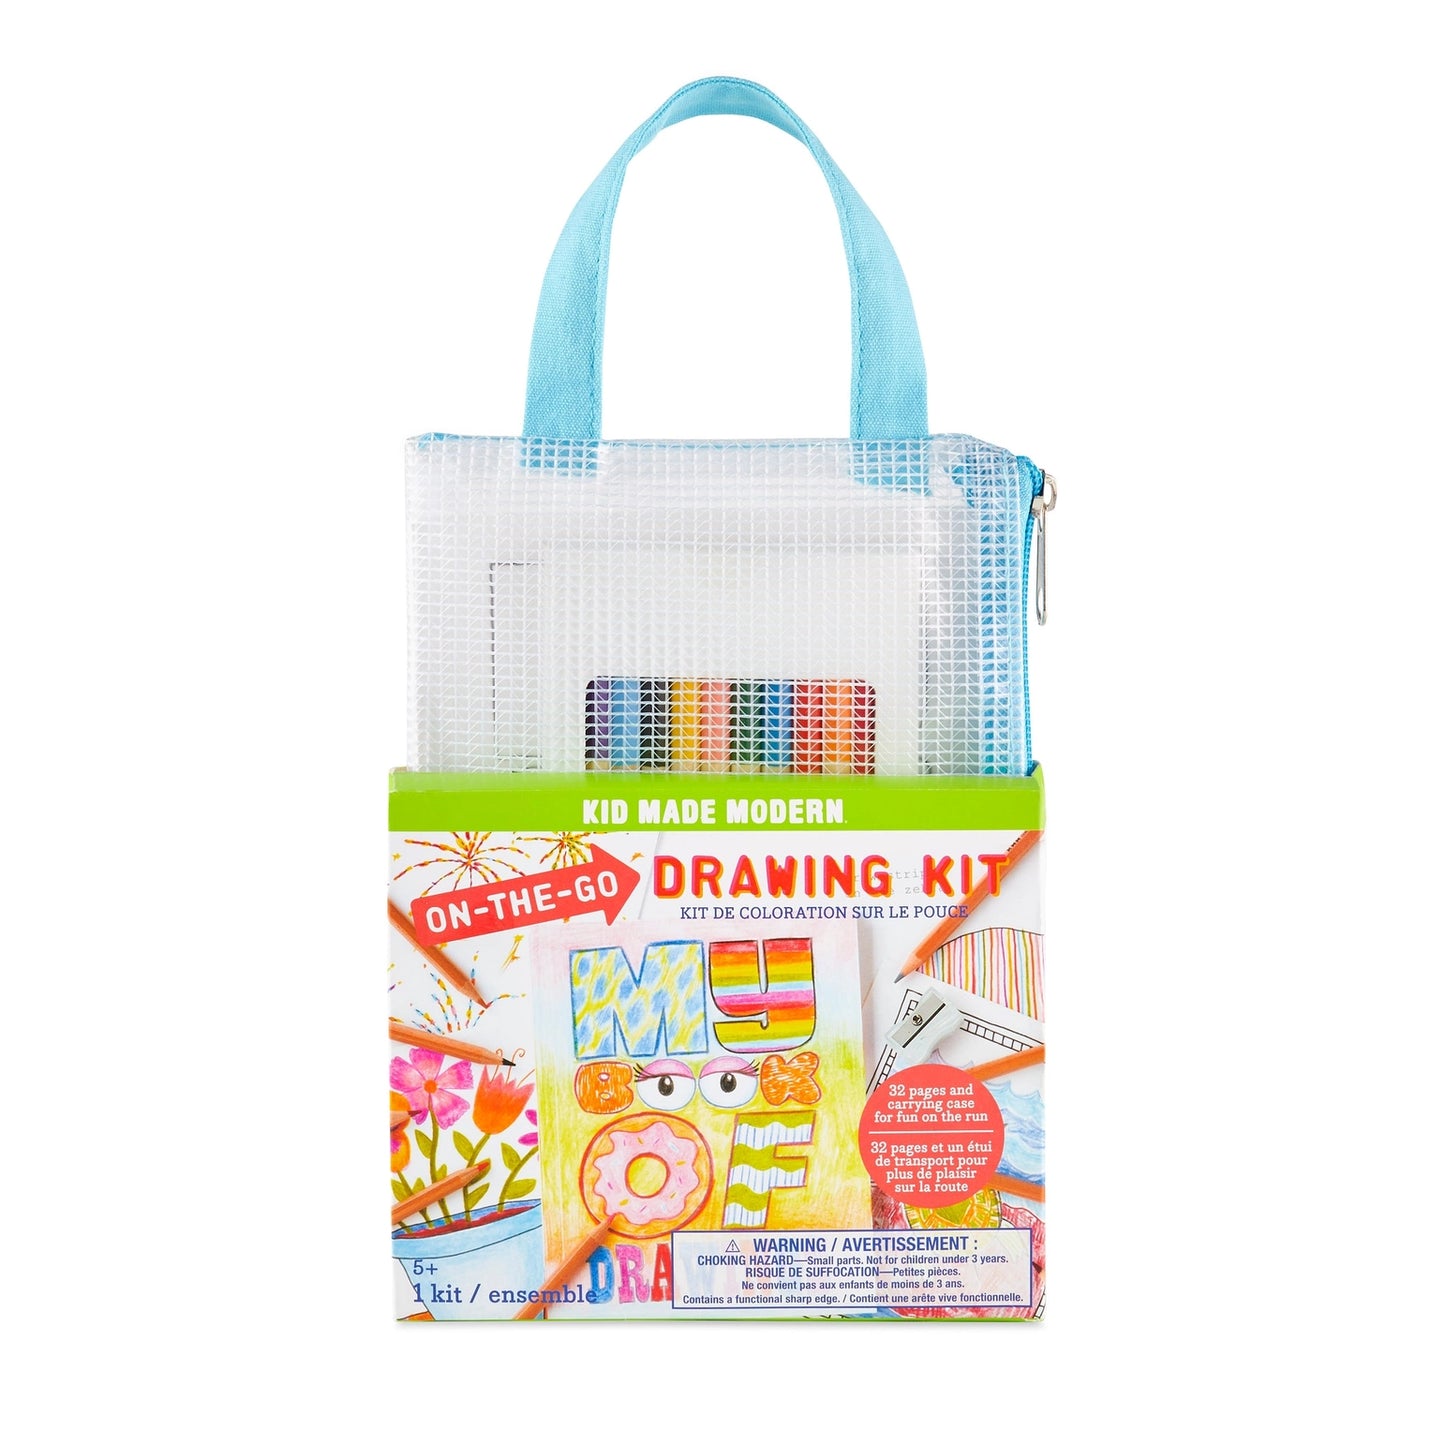 ON-THE-GO DRAWING KIT